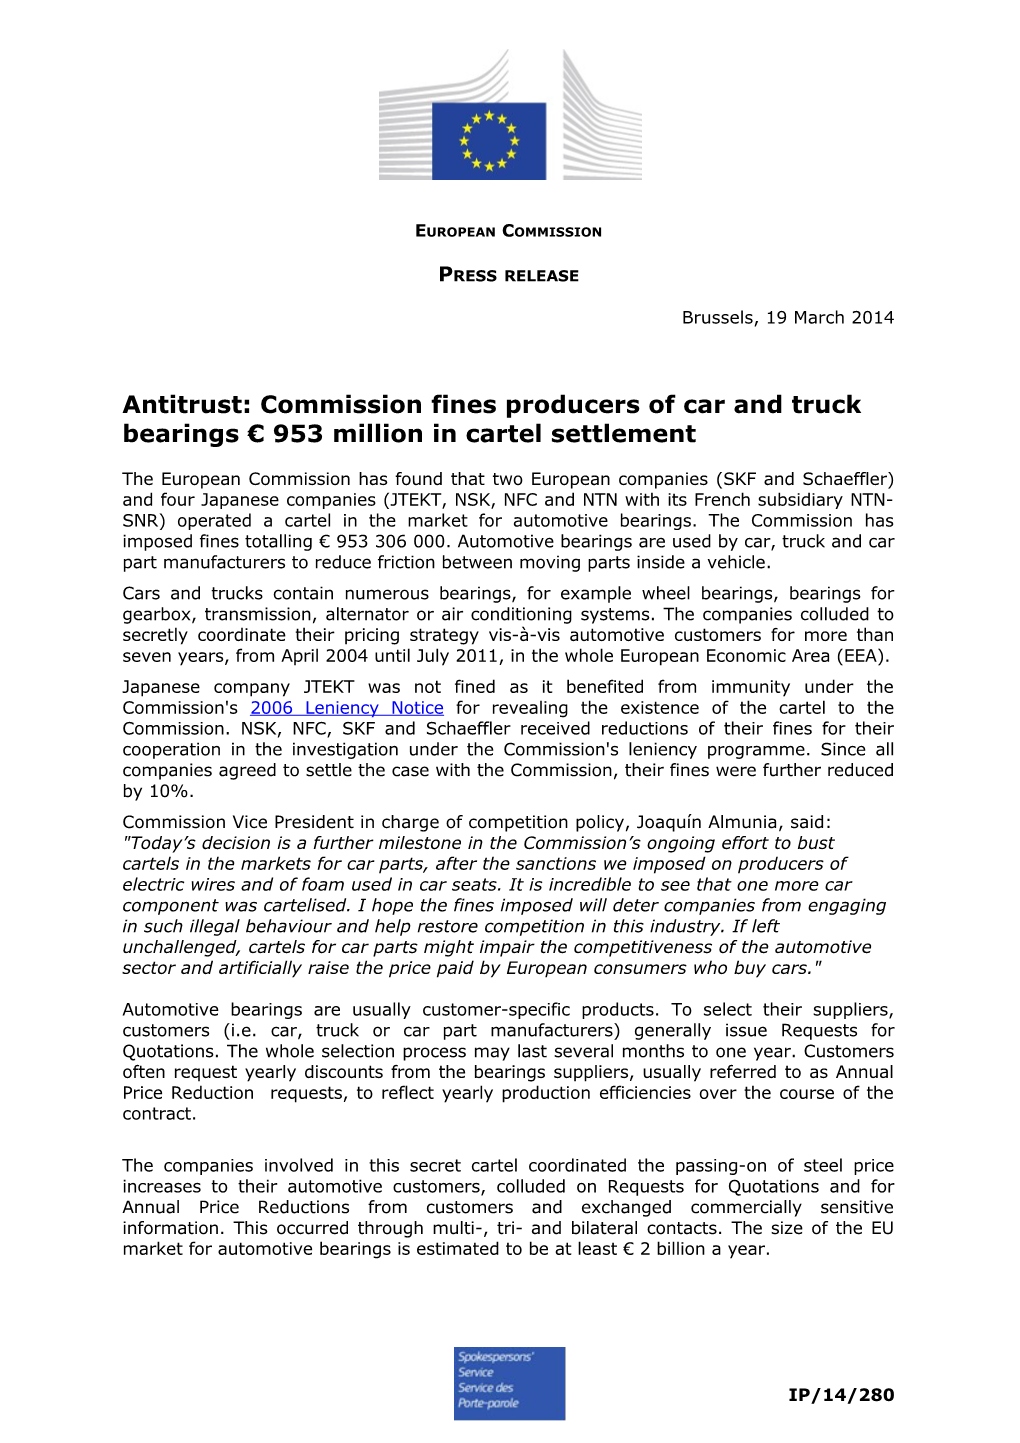 Antitrust: Commission Fines Producers of Car and Truck Bearings 953Million in Cartel Settlement